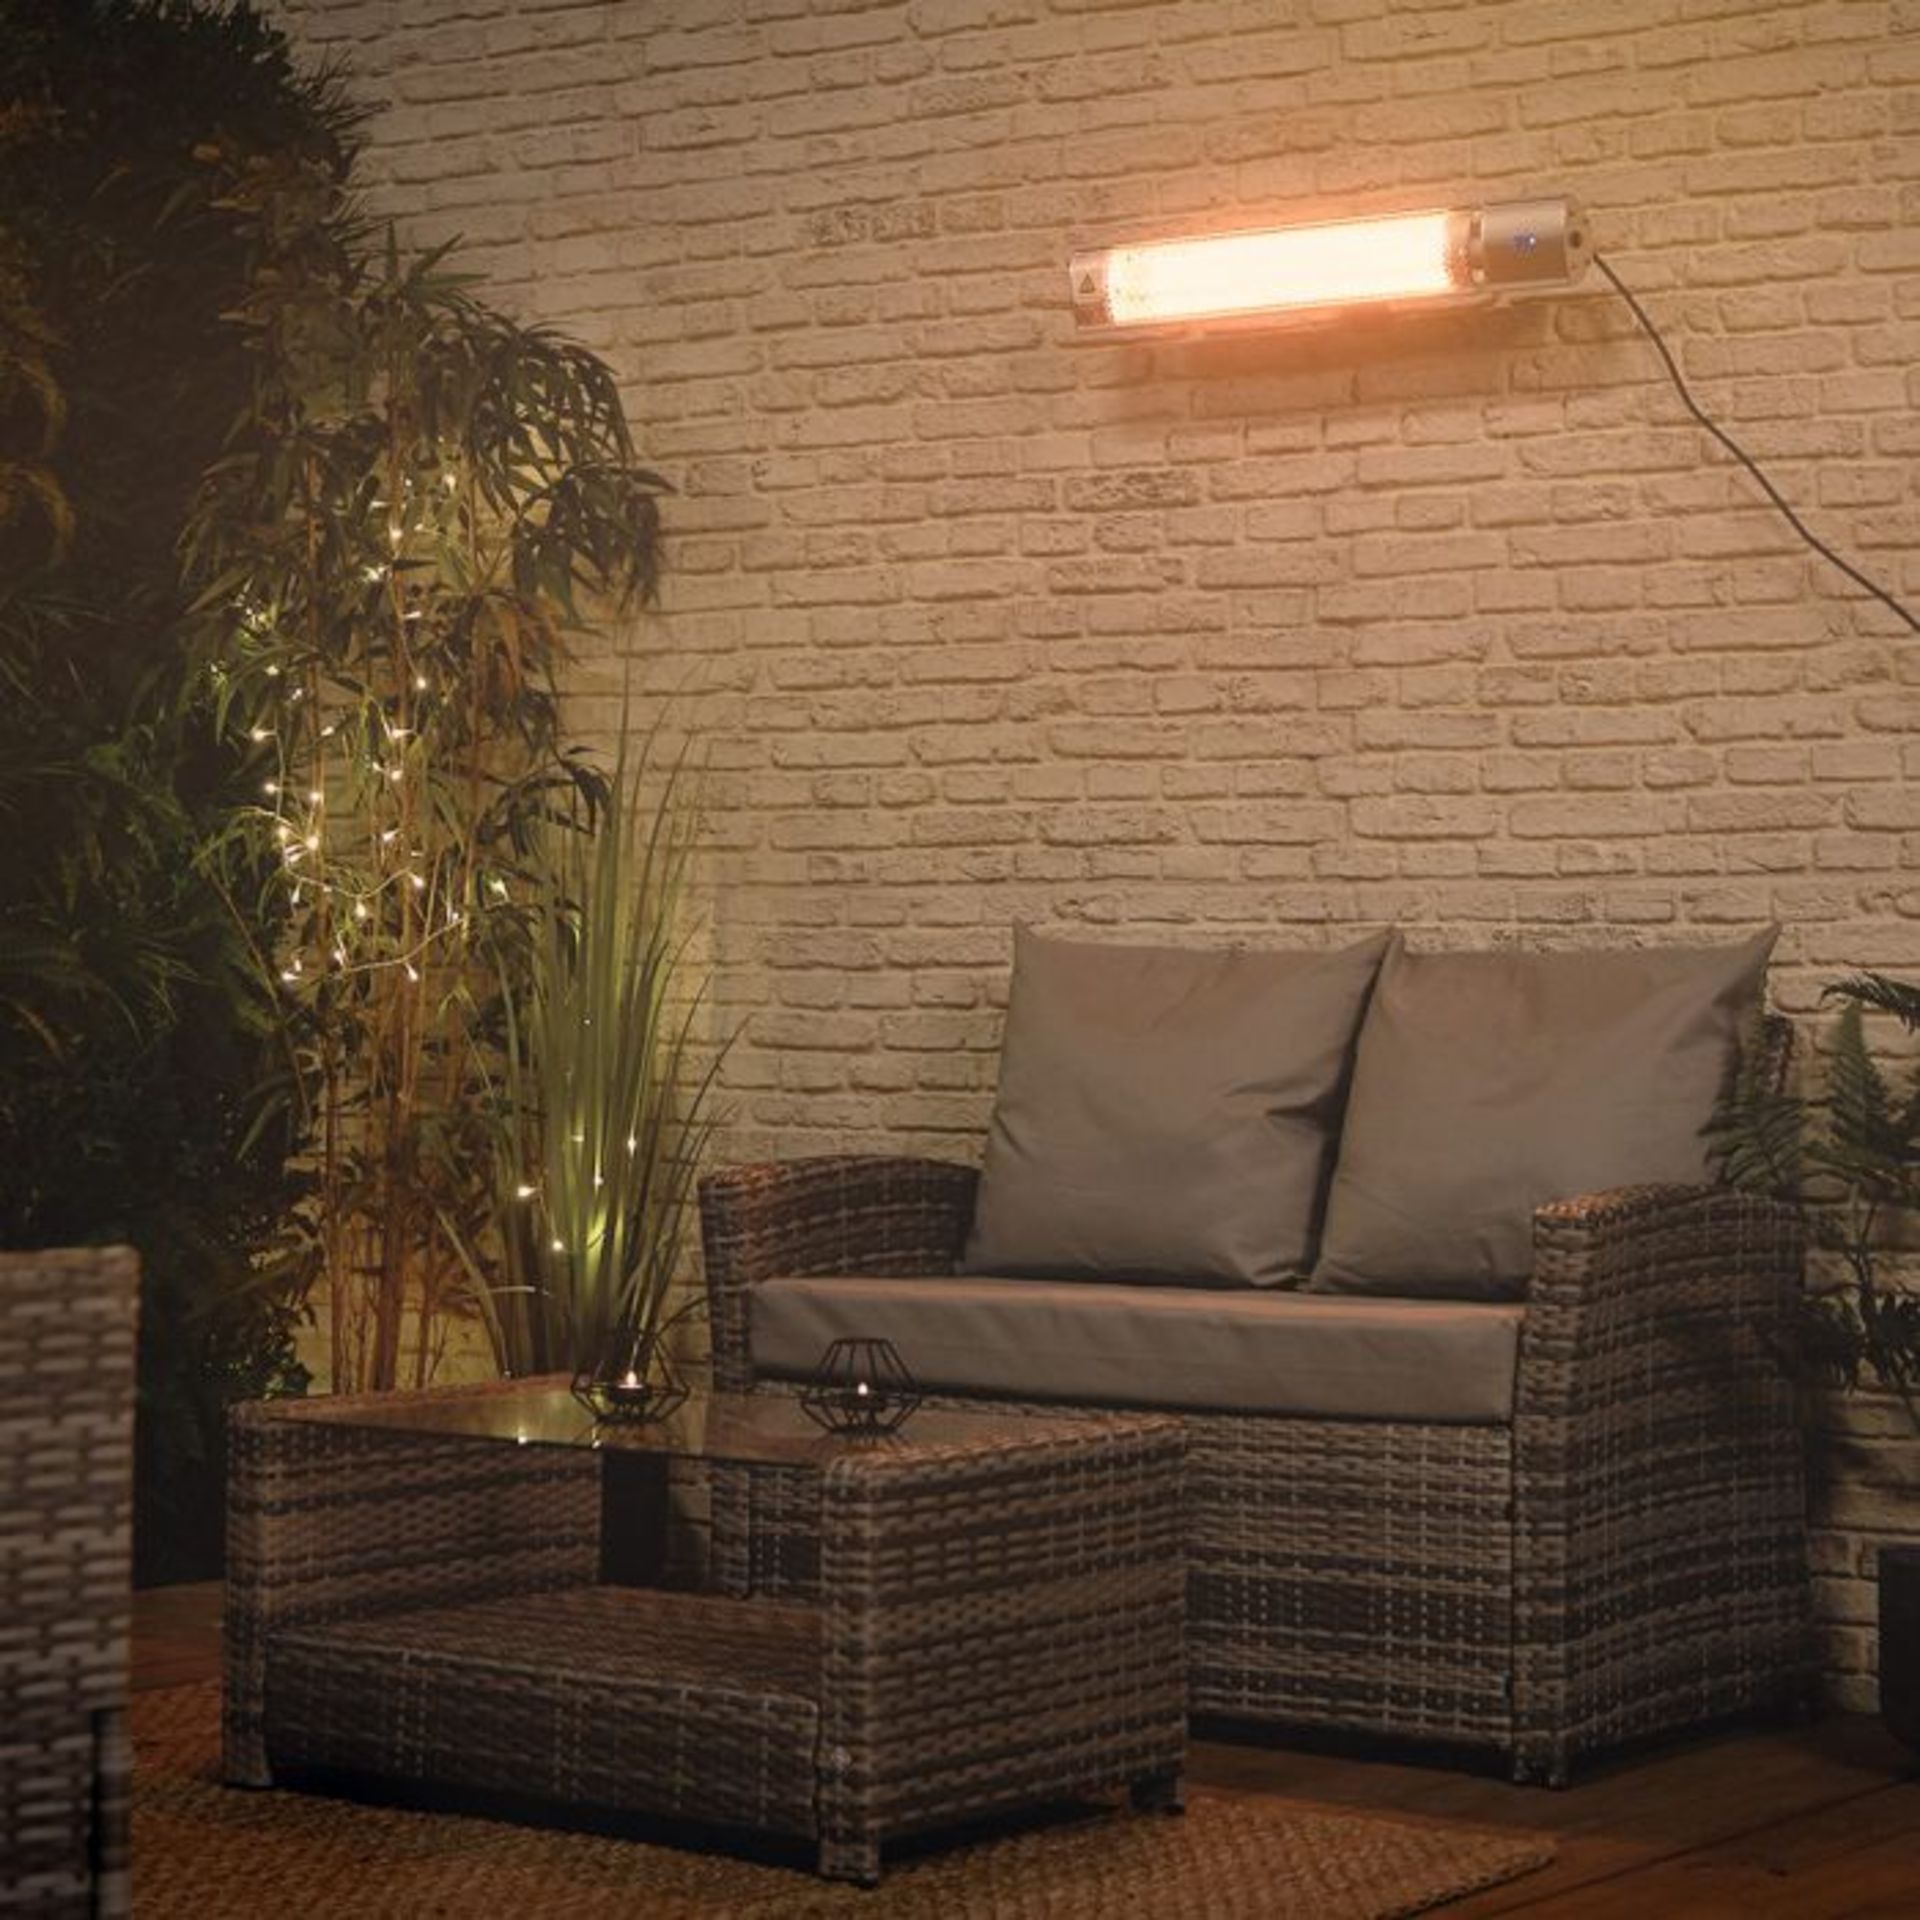 (V5) Wall Mounted Infrared Patio Heater It heats up to the desired setting – 1000W or 2000W ...